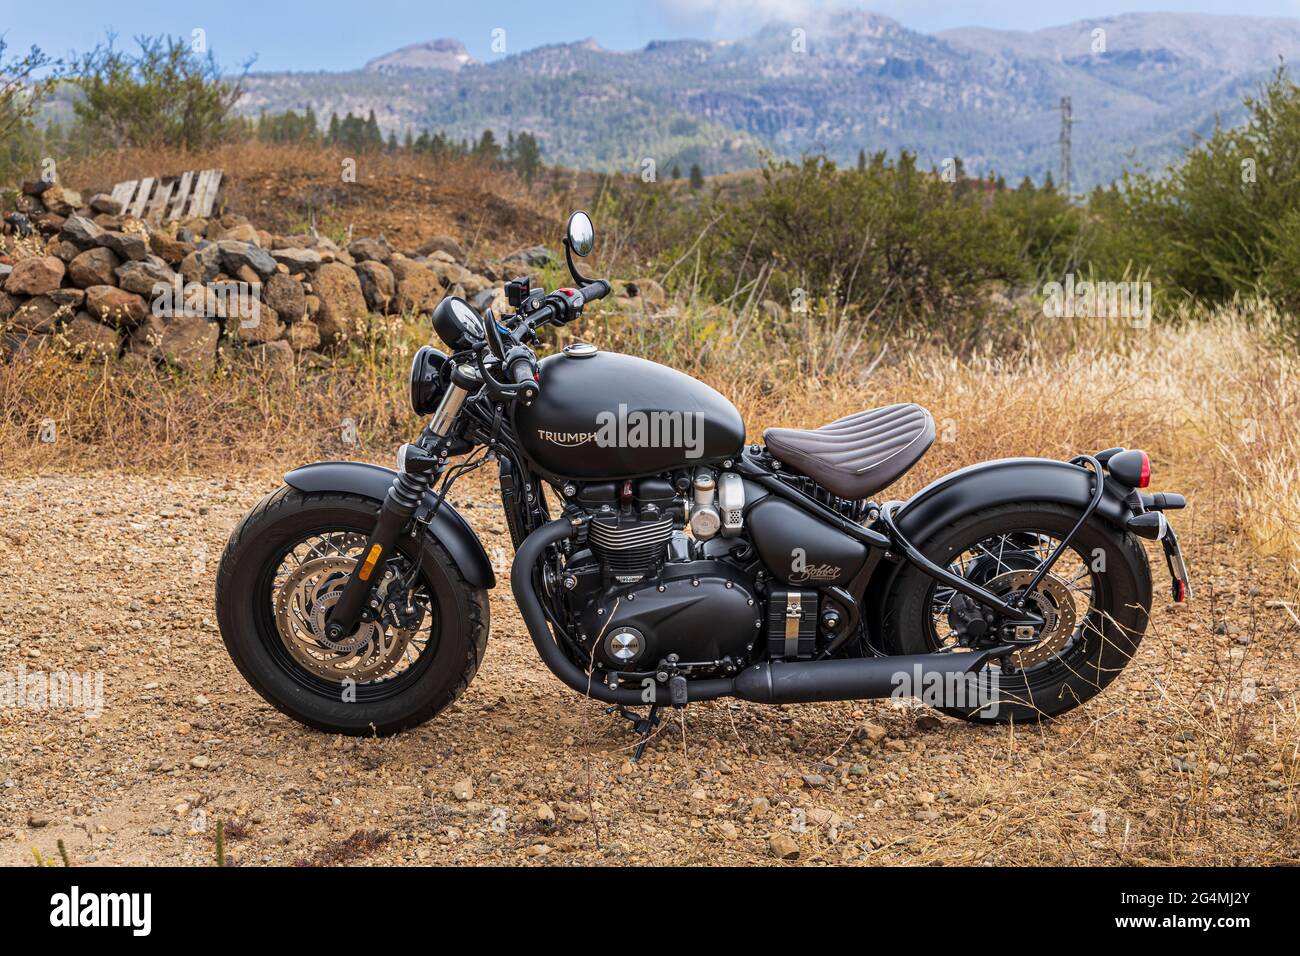 Retro style bike. Triumph Bobber, parked on rough ground in Tenerife, Canary Islands, Spain Stock Photo